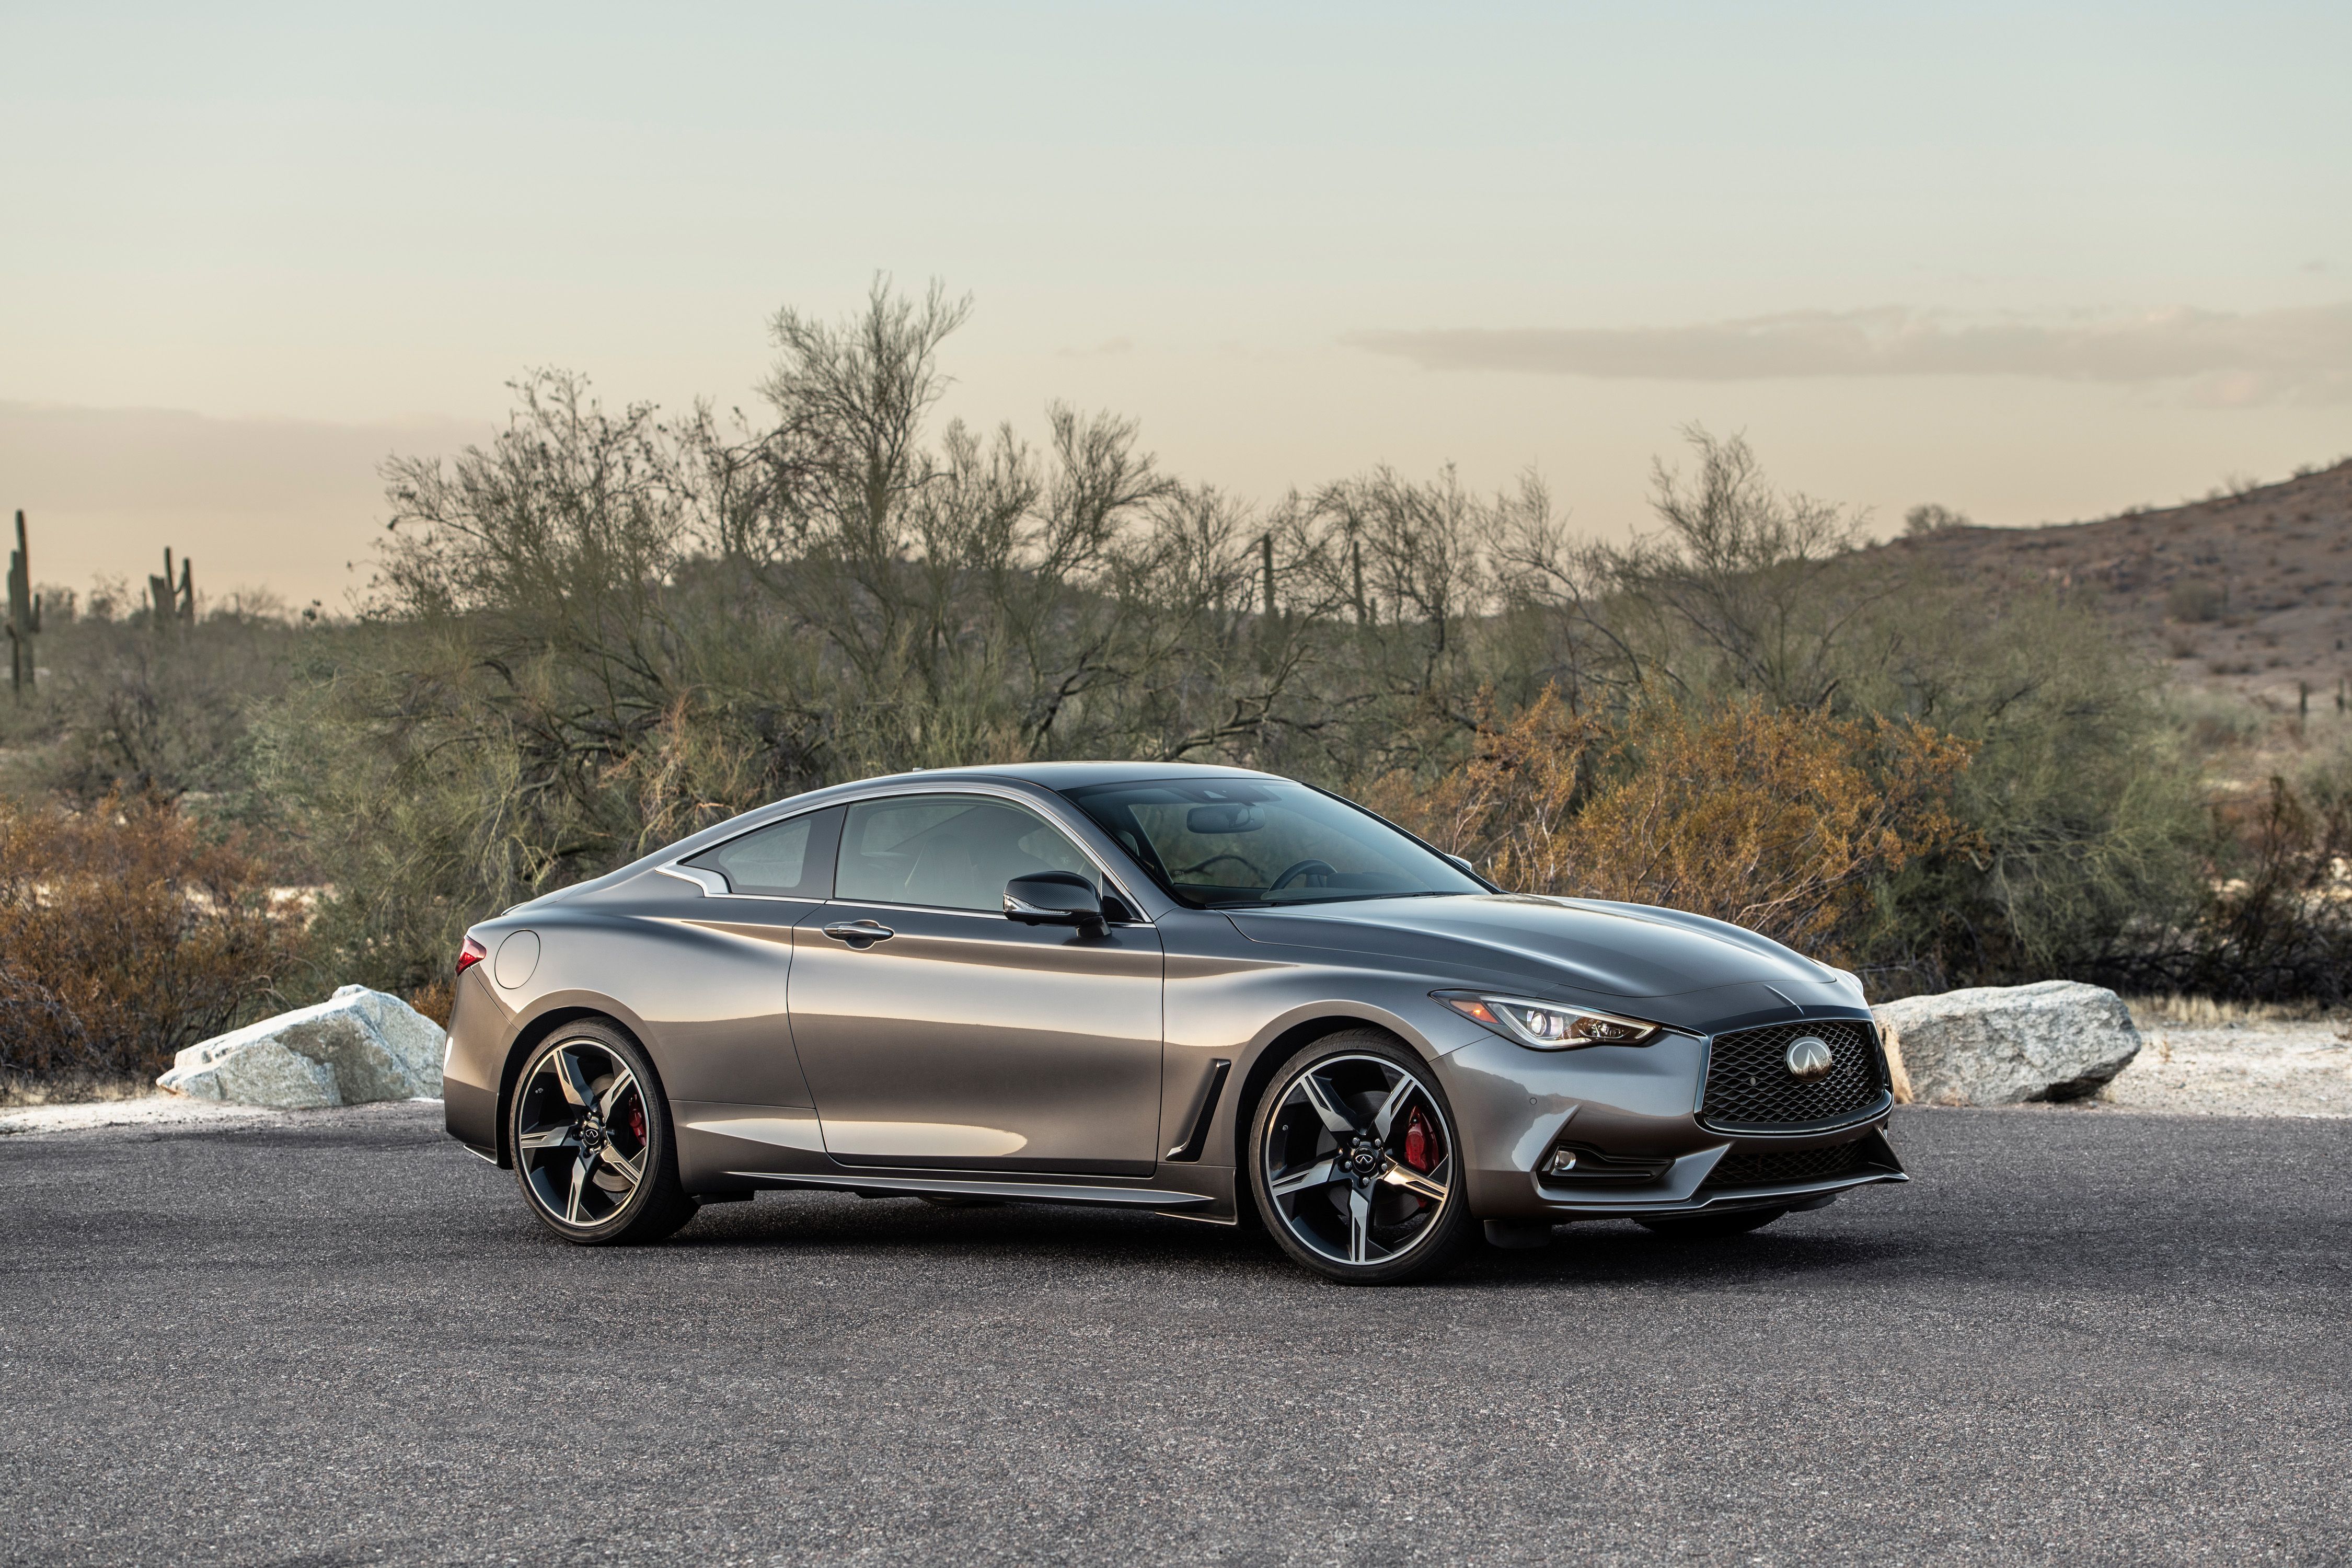 2019 Infiniti Q60 Red Sport 400 Review: Luxury Coupe is Fast